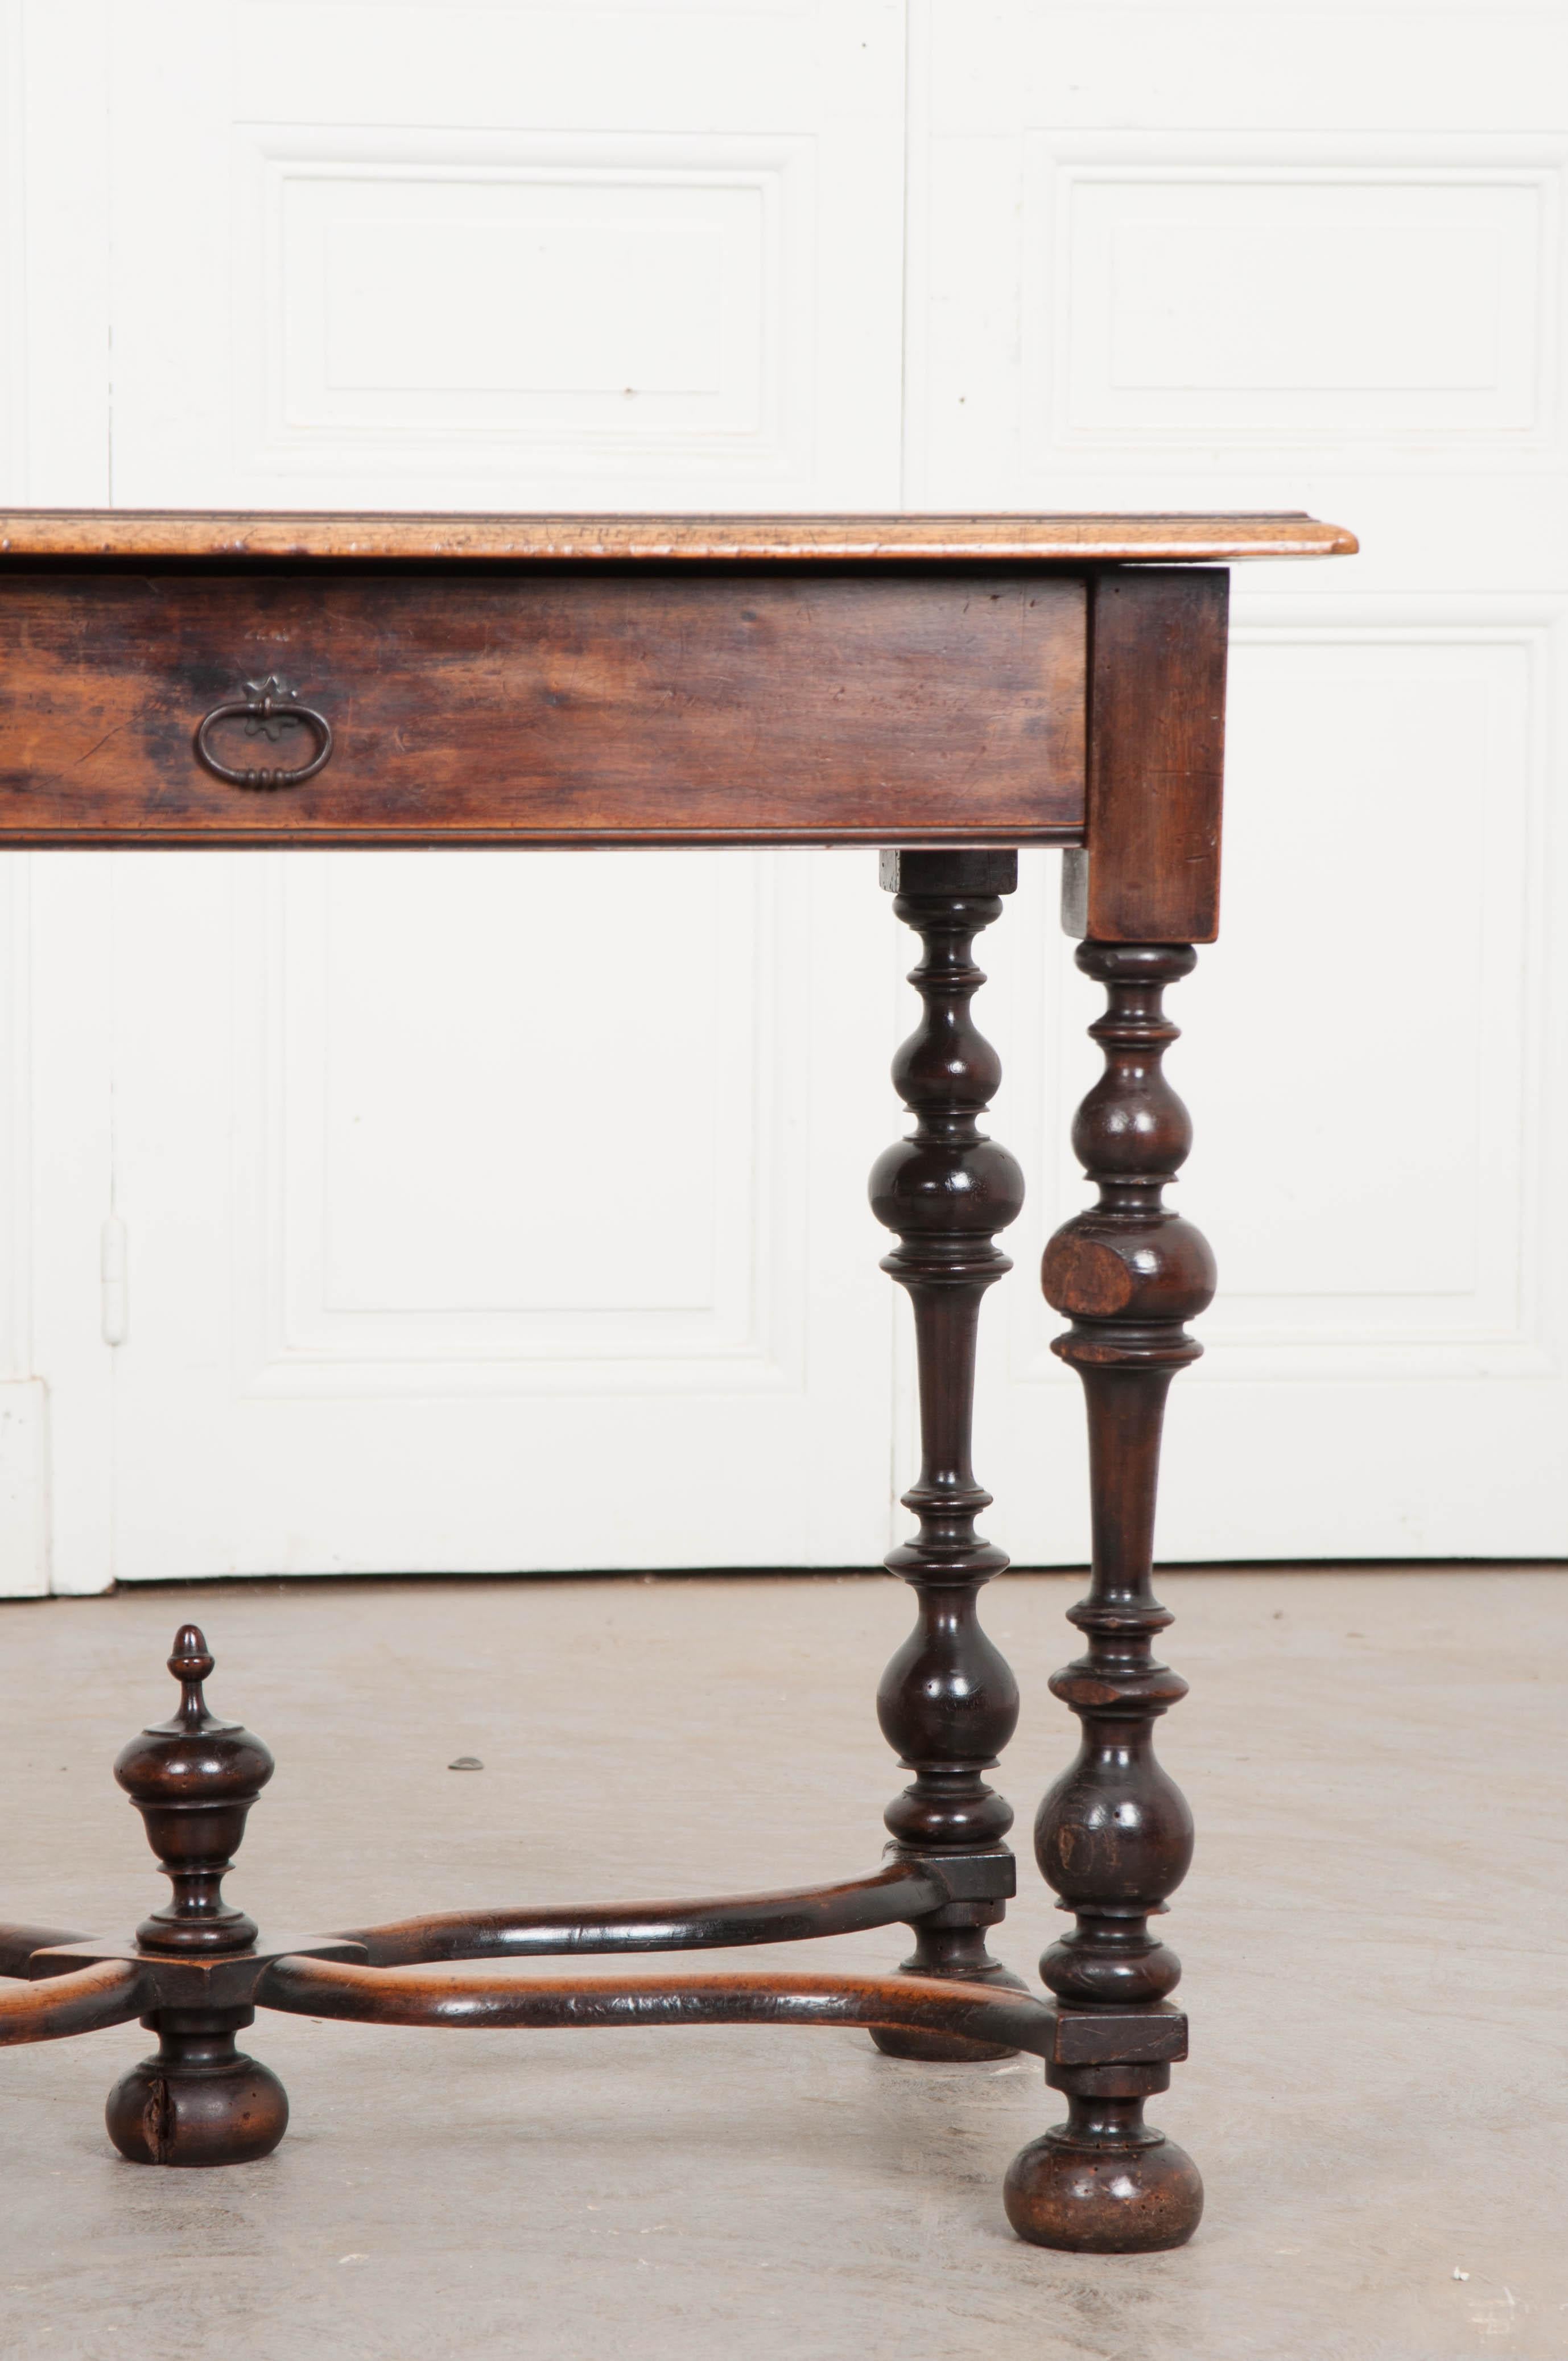 An extraordinary table in walnut, could serve multiple functions, such as an occasional table or a small writing desk. The walnut top rests upon a wooden apron which houses one large drawer over elaborate wood turned legs of the William and Mary